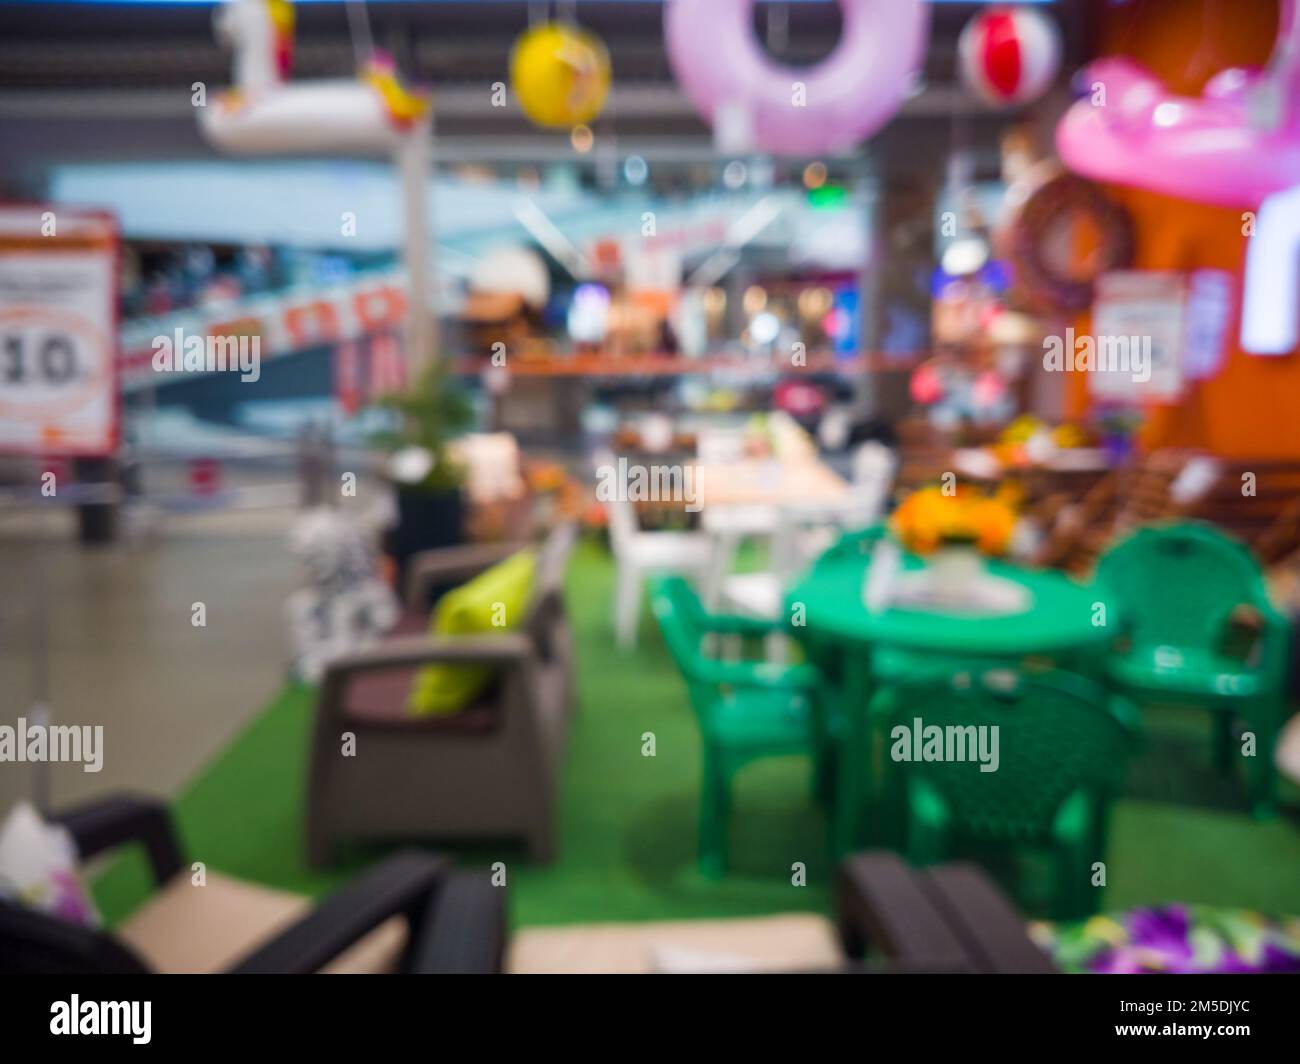 Abstract defocused blurred image of furniture store on sale. Department for the sale of garden furniture and tools - can use to display or montage on Stock Photo